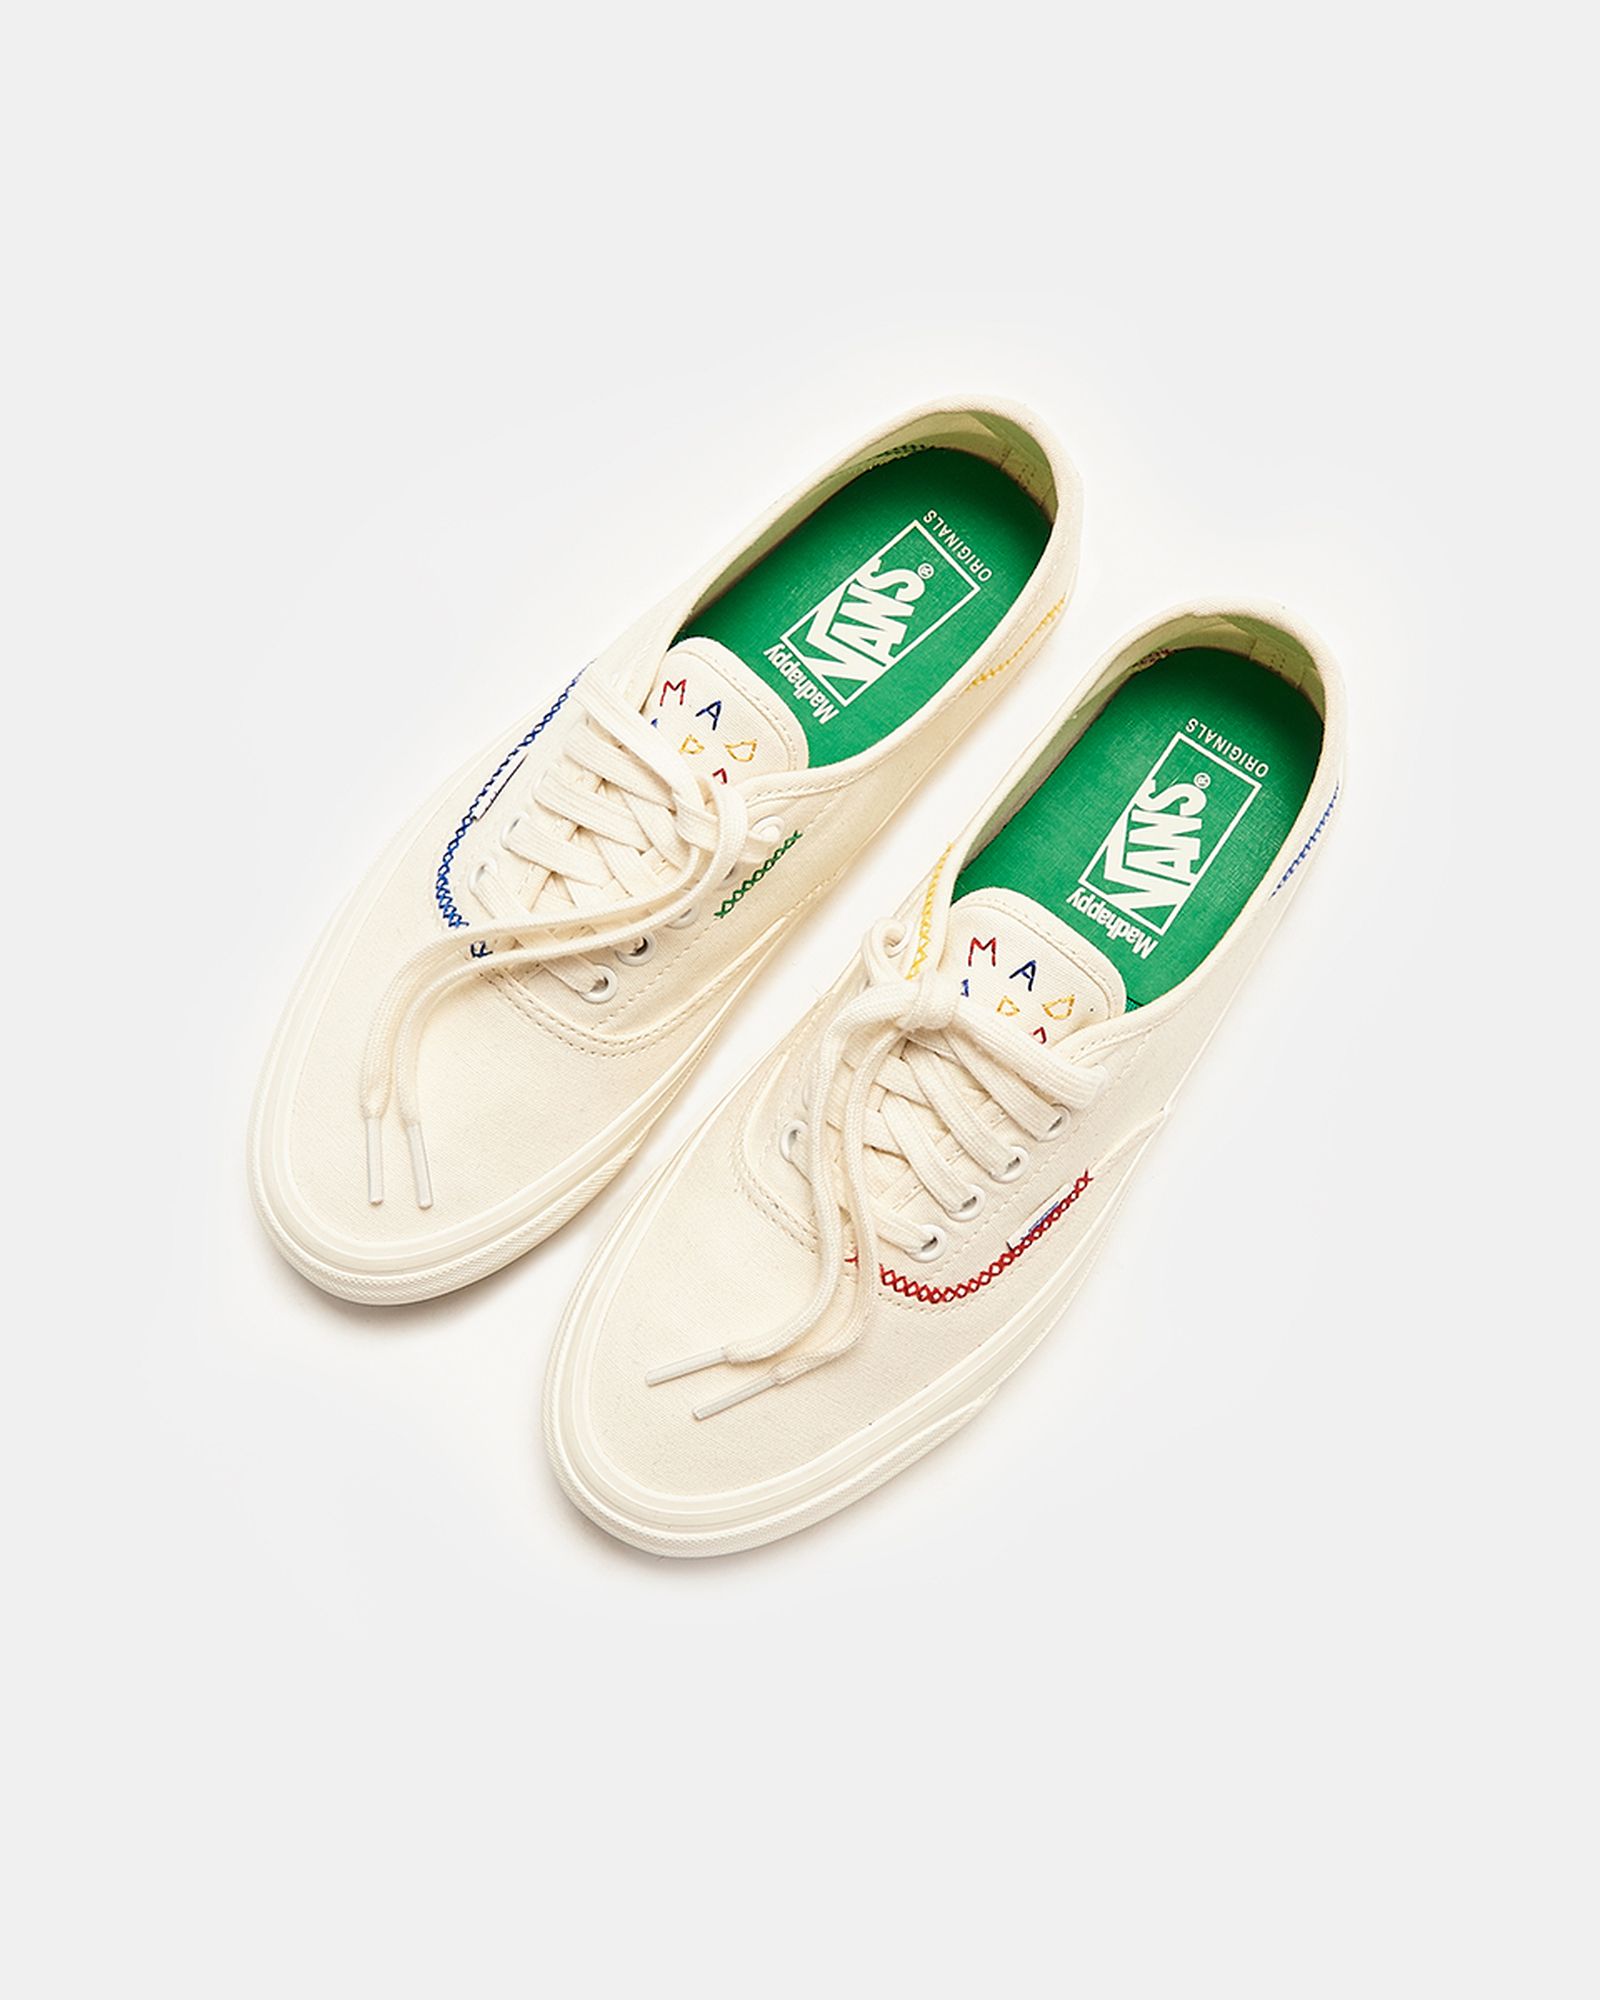 madhappy-vault-by-vans-og-style-43-lx-release-date-price-07